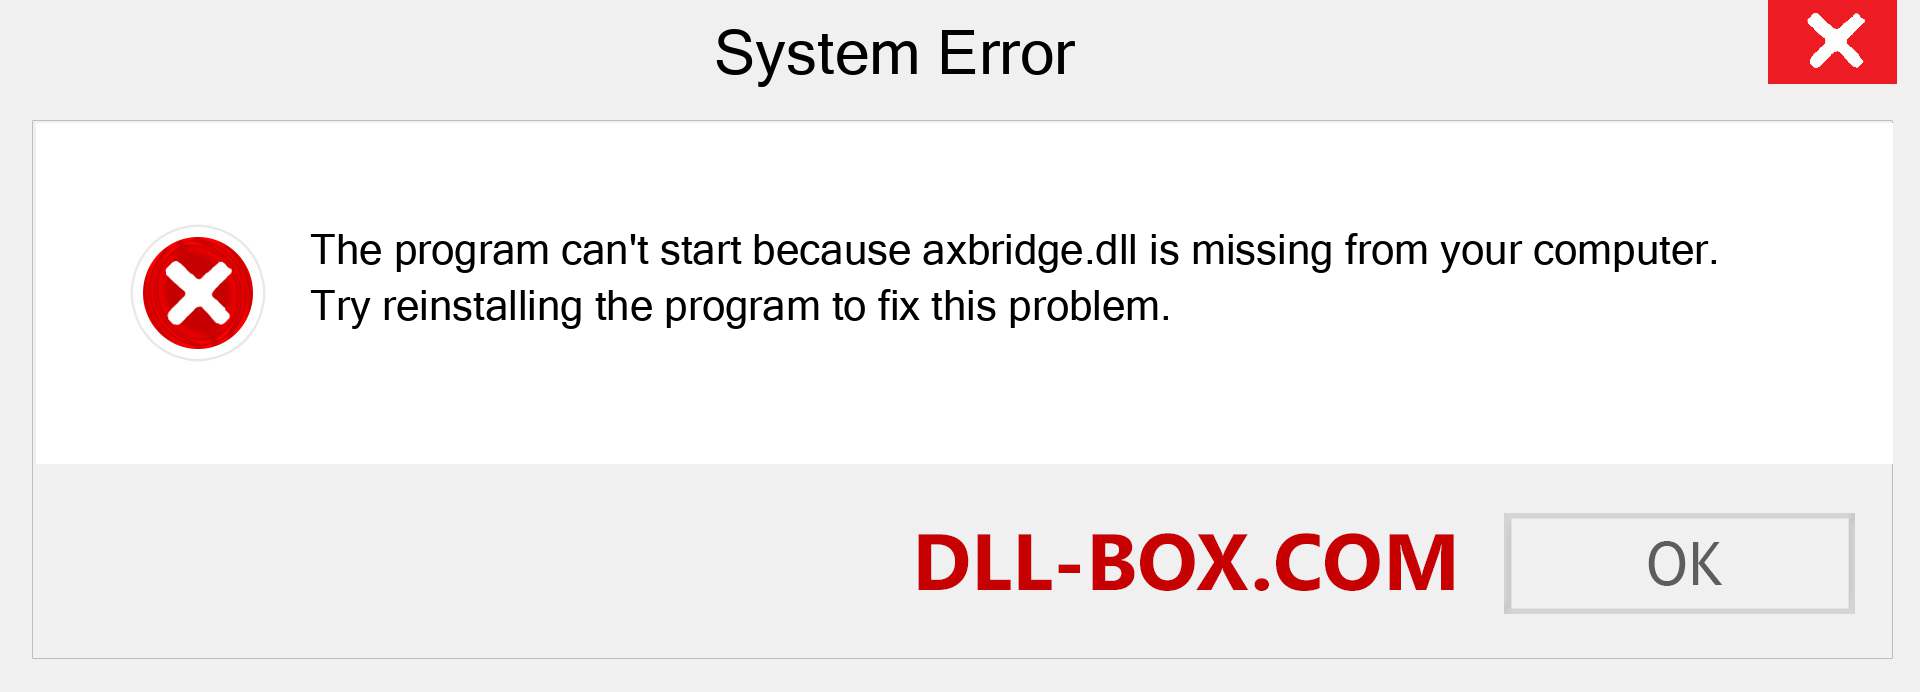  axbridge.dll file is missing?. Download for Windows 7, 8, 10 - Fix  axbridge dll Missing Error on Windows, photos, images